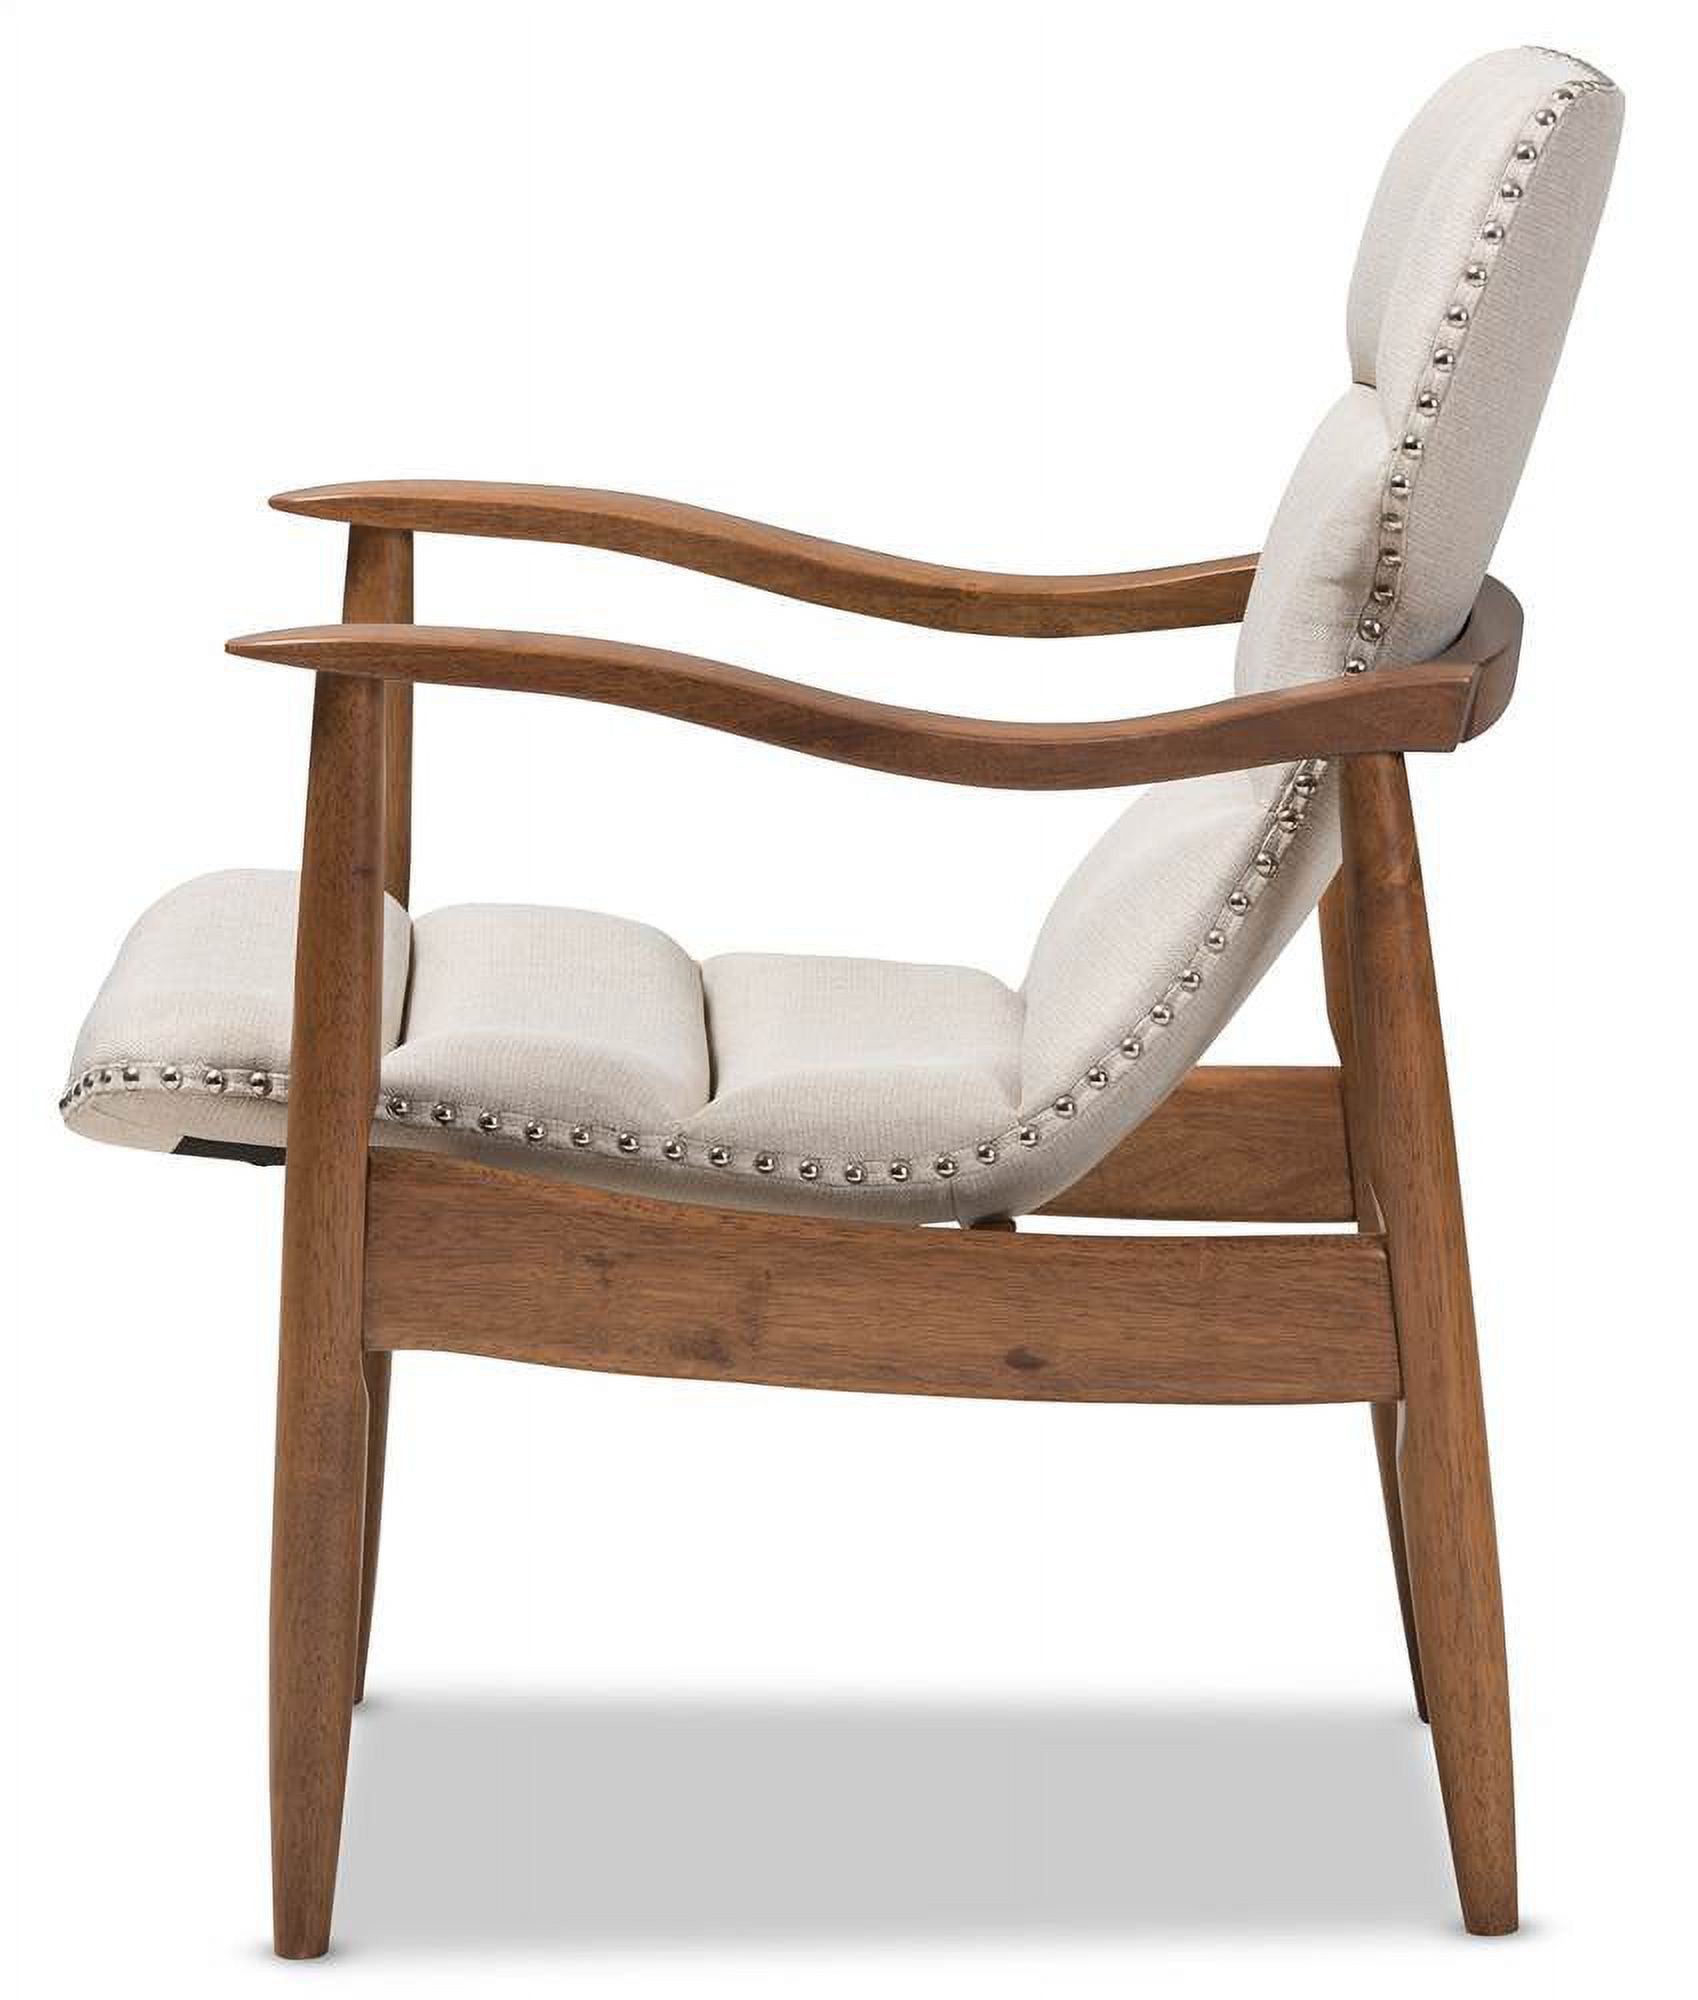 Mid-Century Modern Lounge Chair in Light Beige and Walnut Brown - image 3 of 6